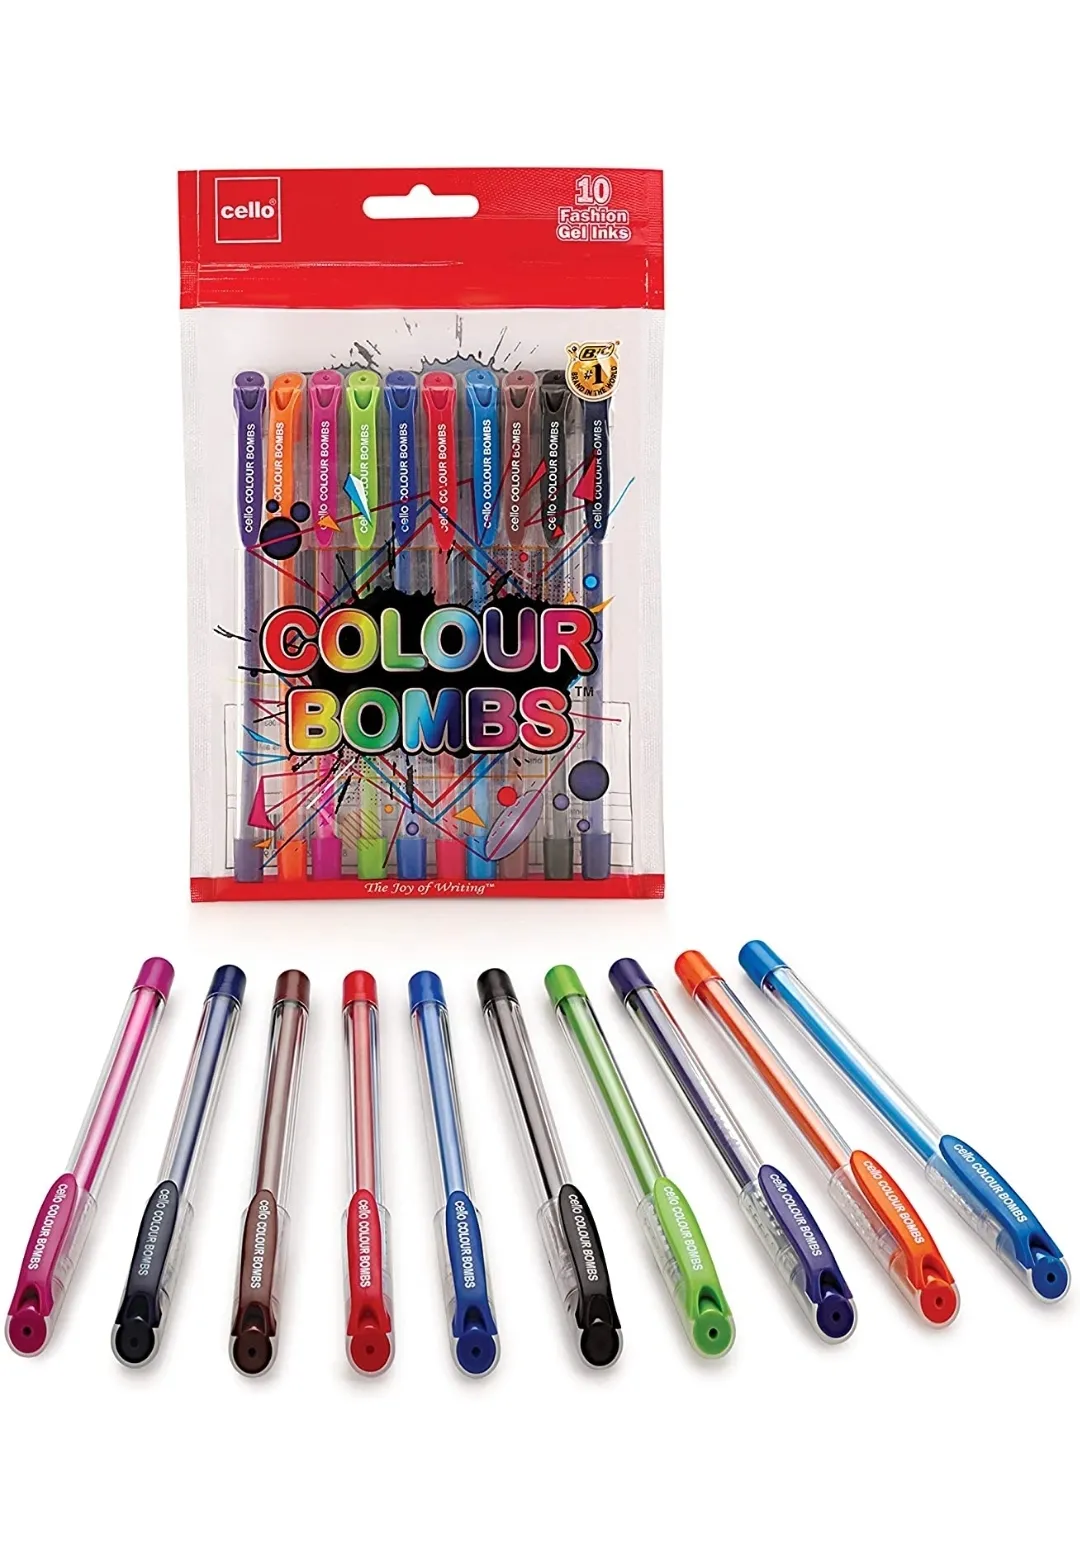 Cello Colour Bombs Coloured Ink Gel Pen Pack of 10 Assorted, 10 Vivid Ink Colors, Ideal for Art, Project Work, Presentation, Journal Work